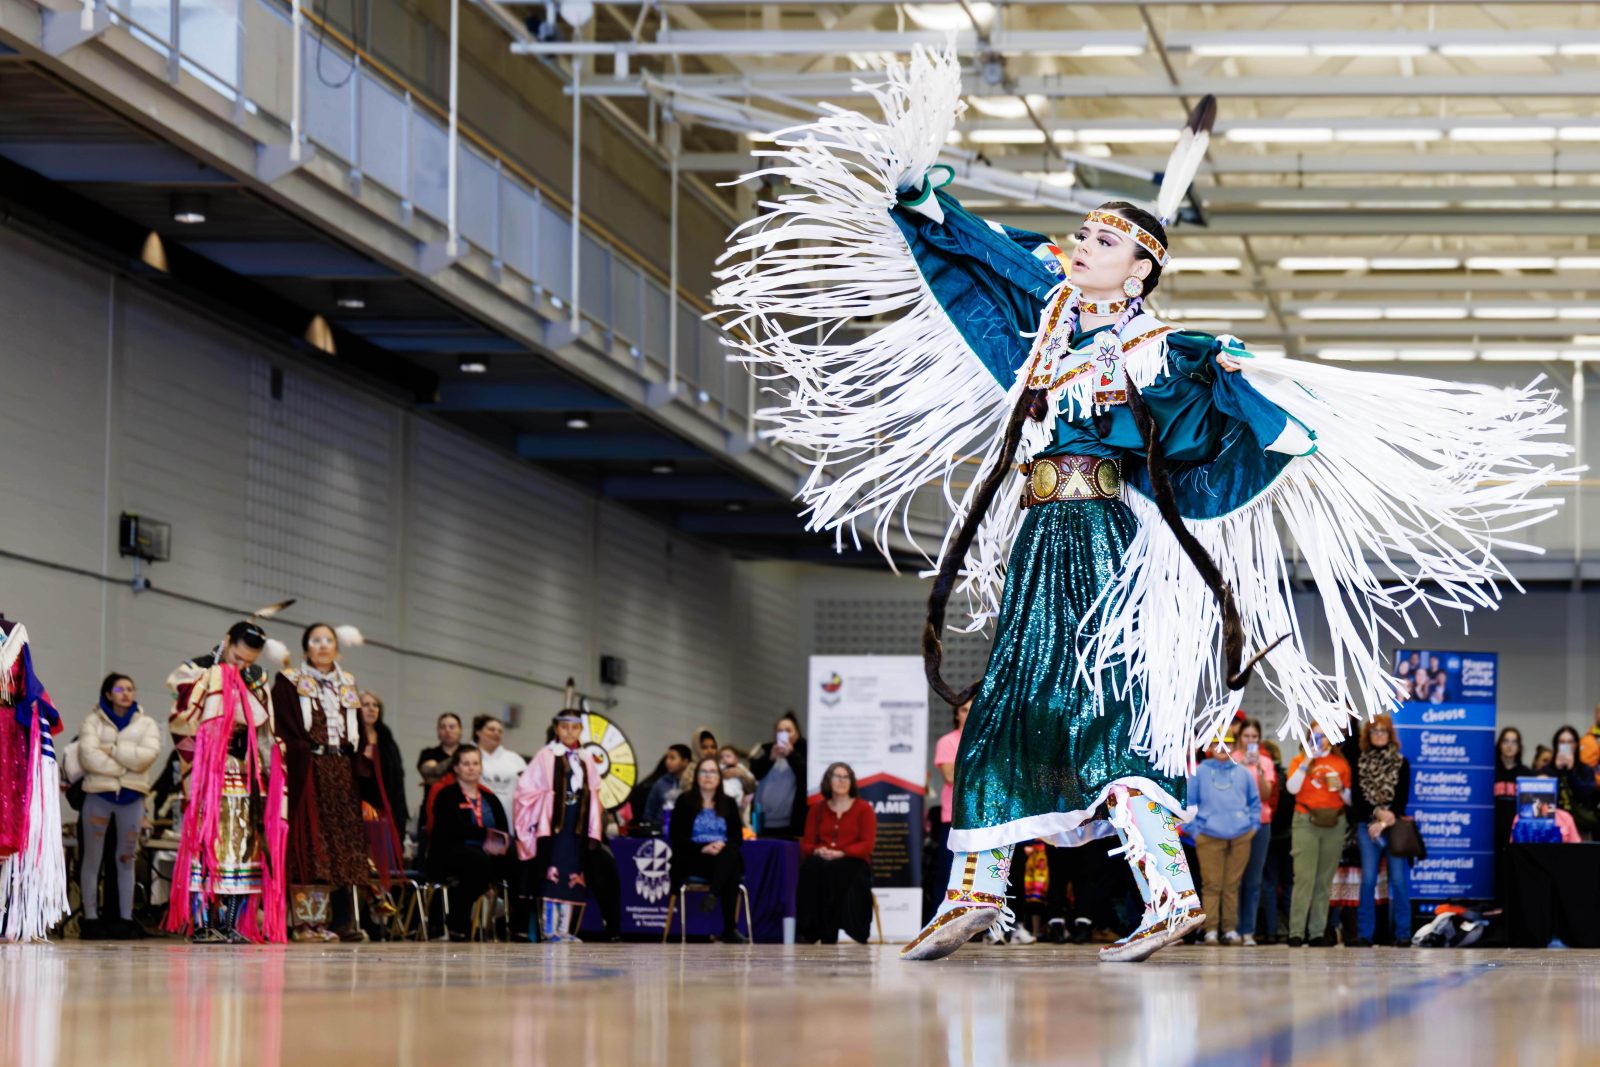 A woman in traditional Indigenous regalia dances in front of a crowd in a gymnasium.